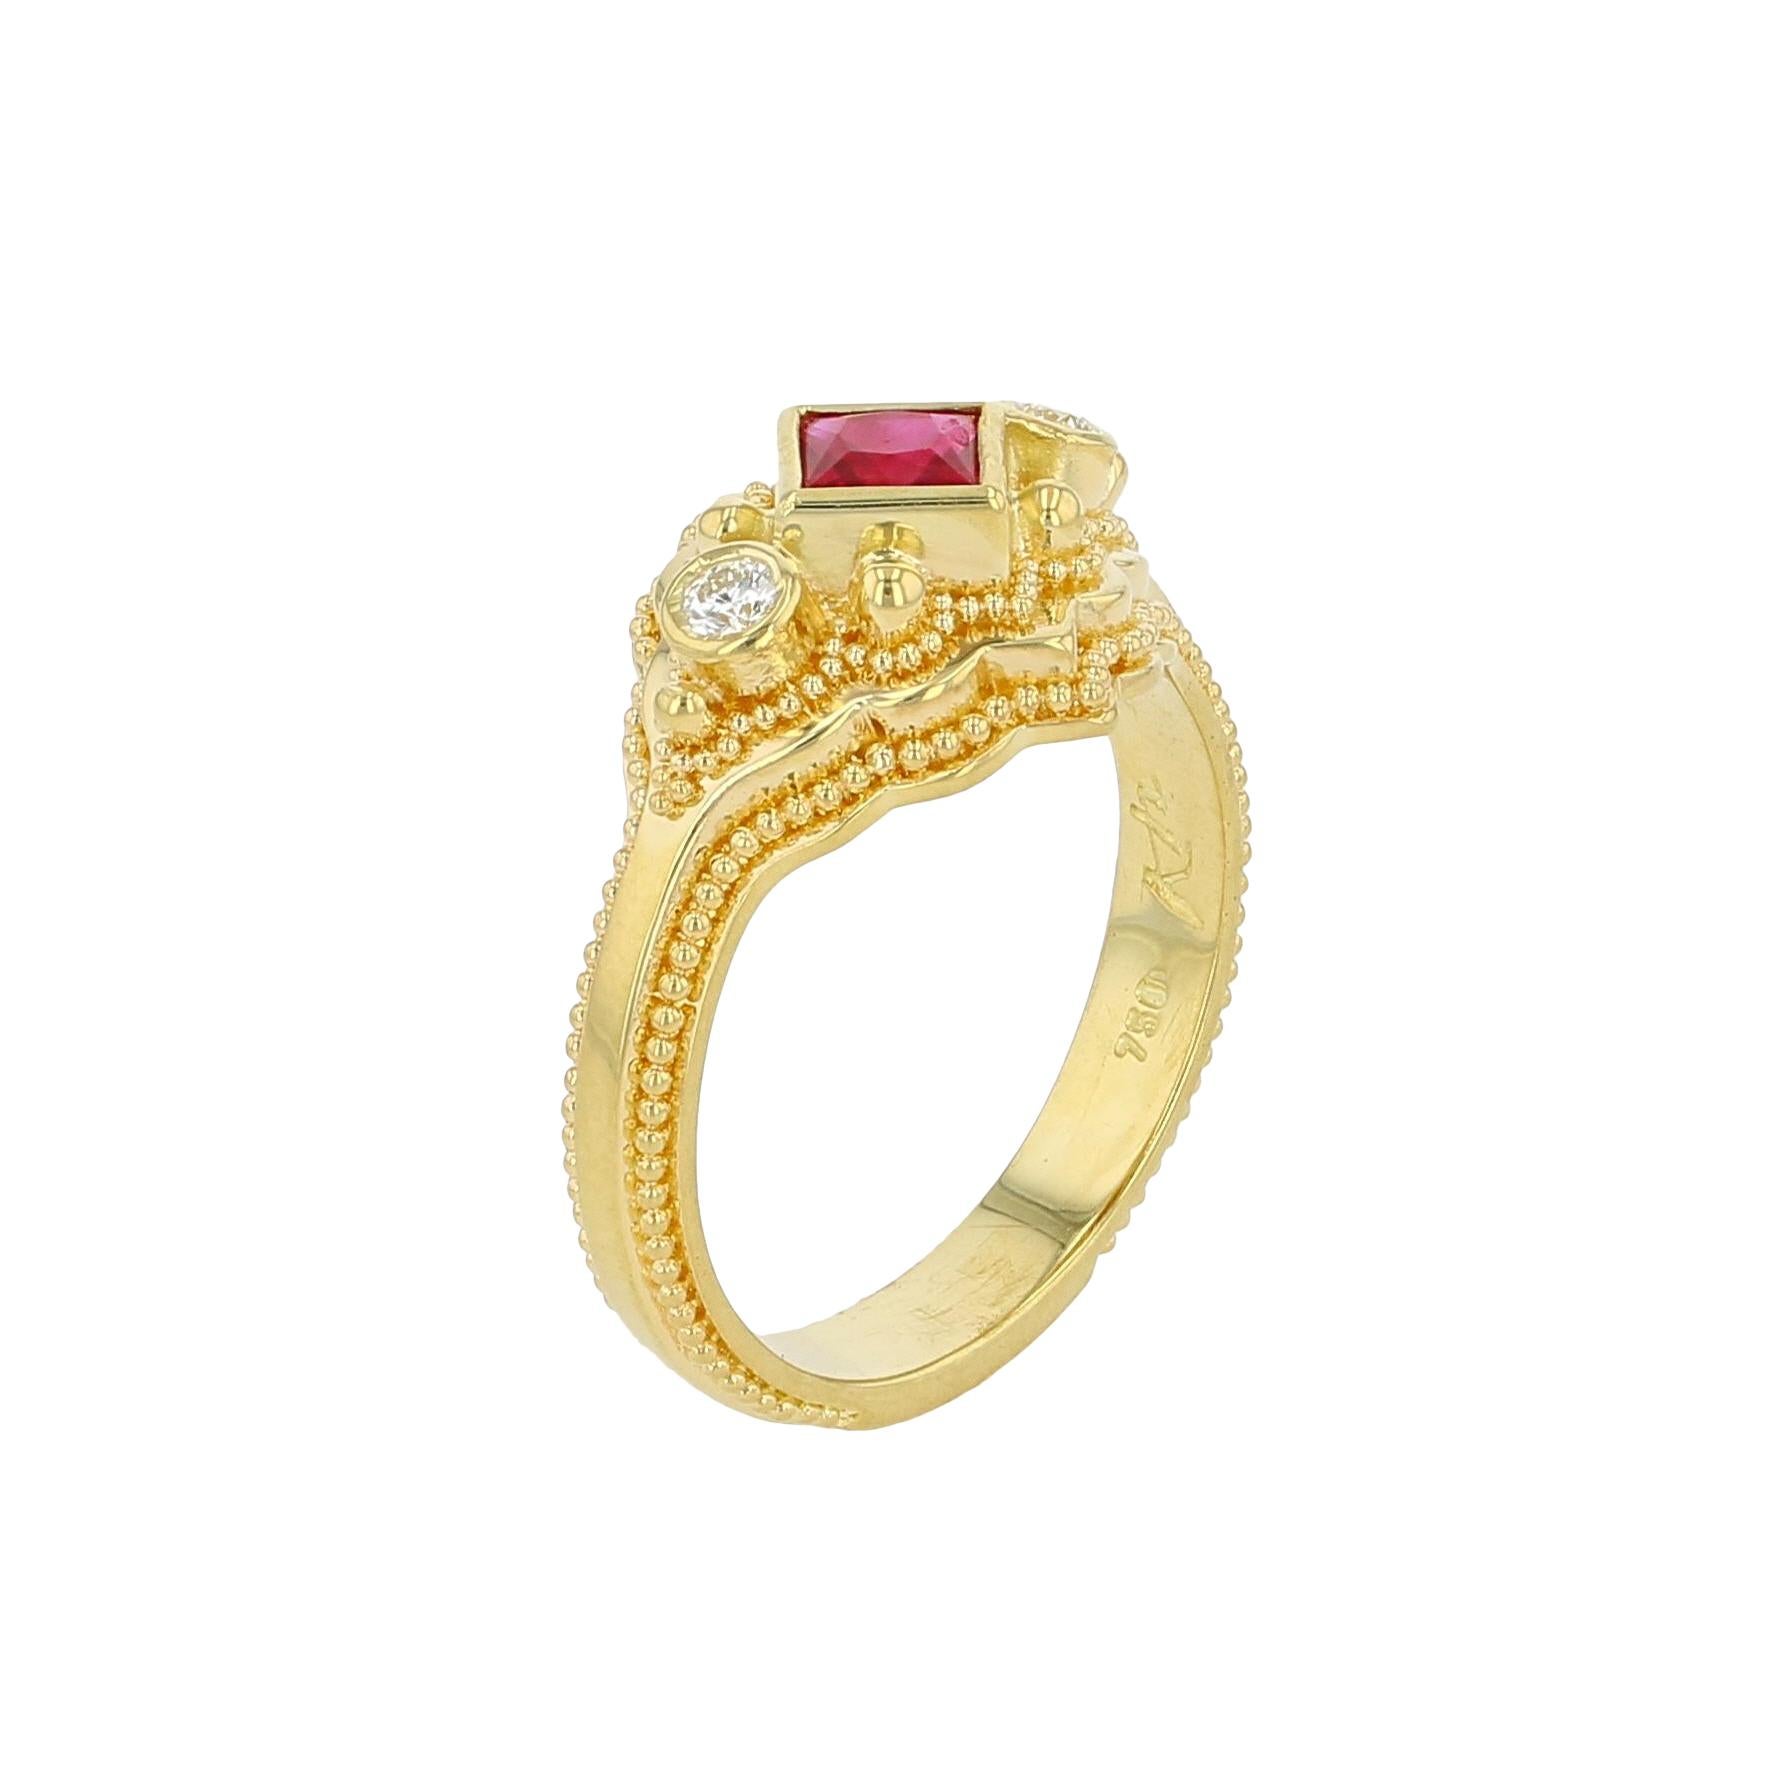 Princess Cut 18 karat Gold Ruby and Diamond Cocktail Ring with fine Granulation For Sale